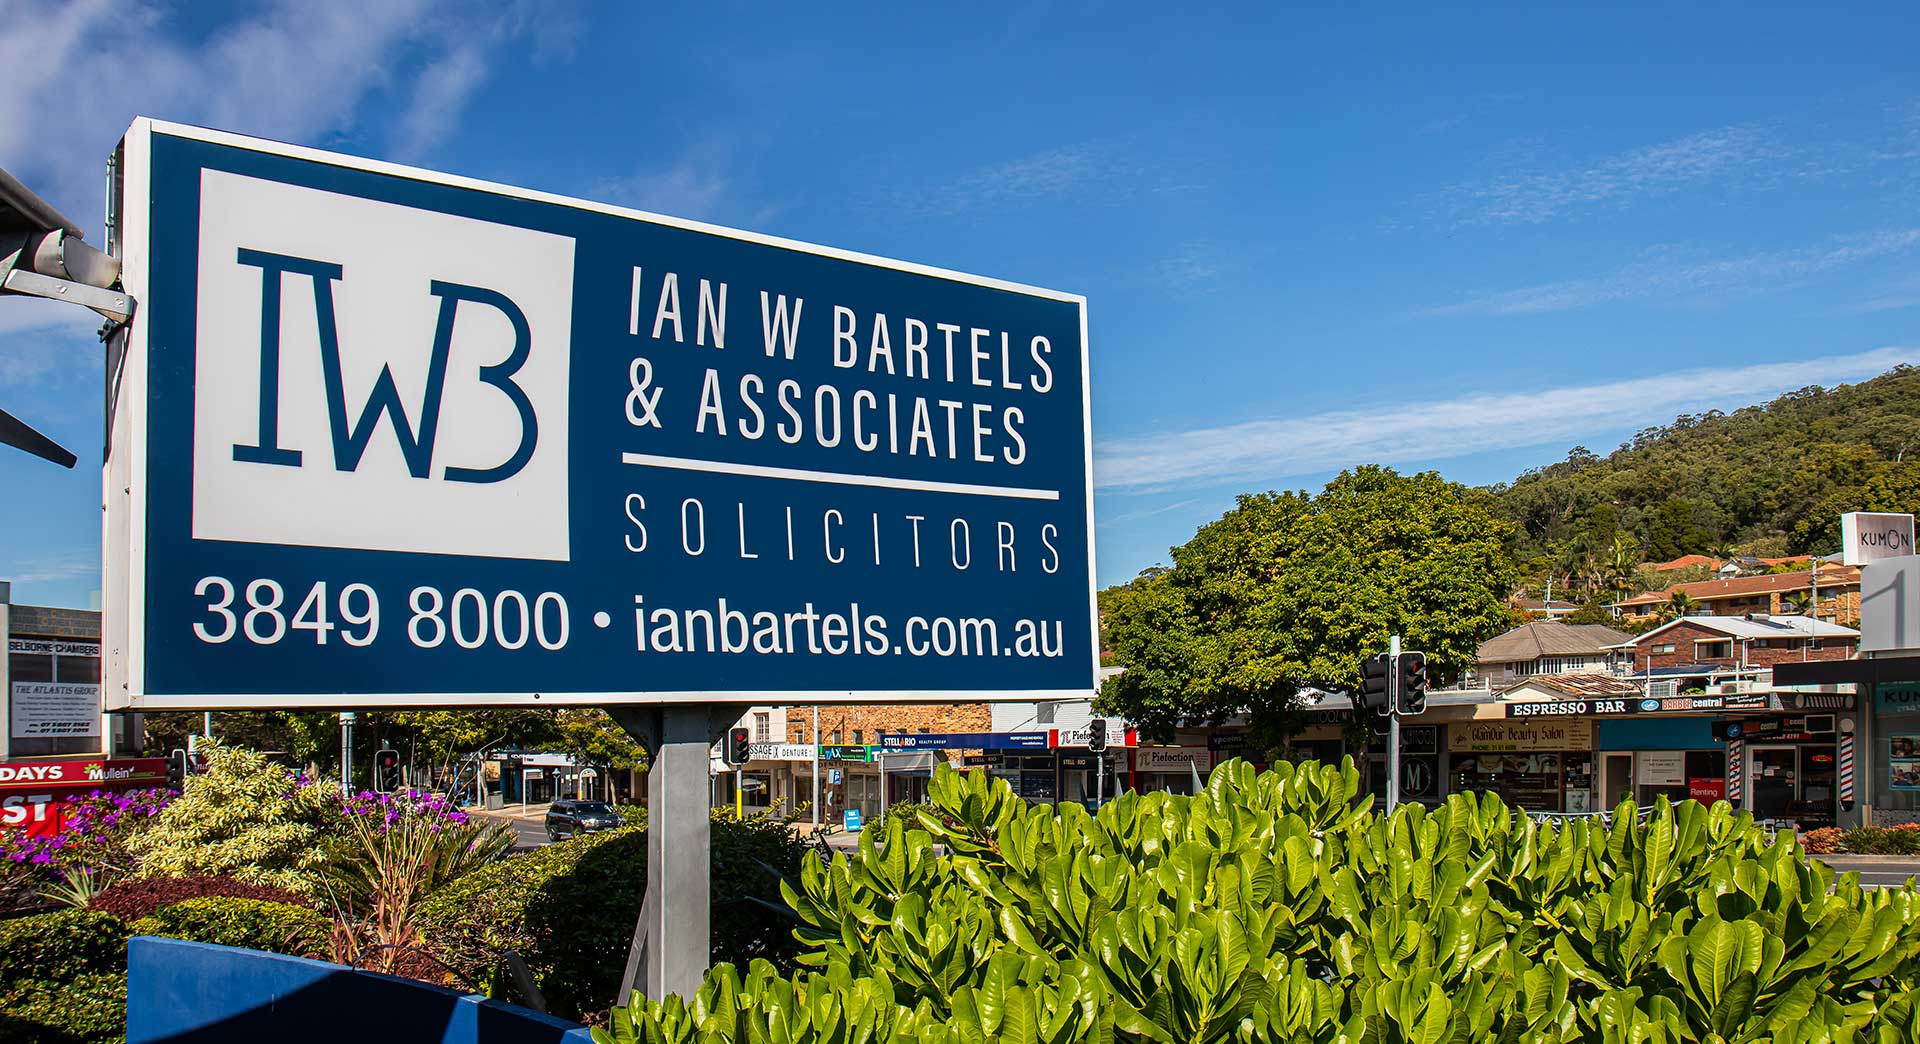 The BIGGEST Little LAW FIRM in Brisbane